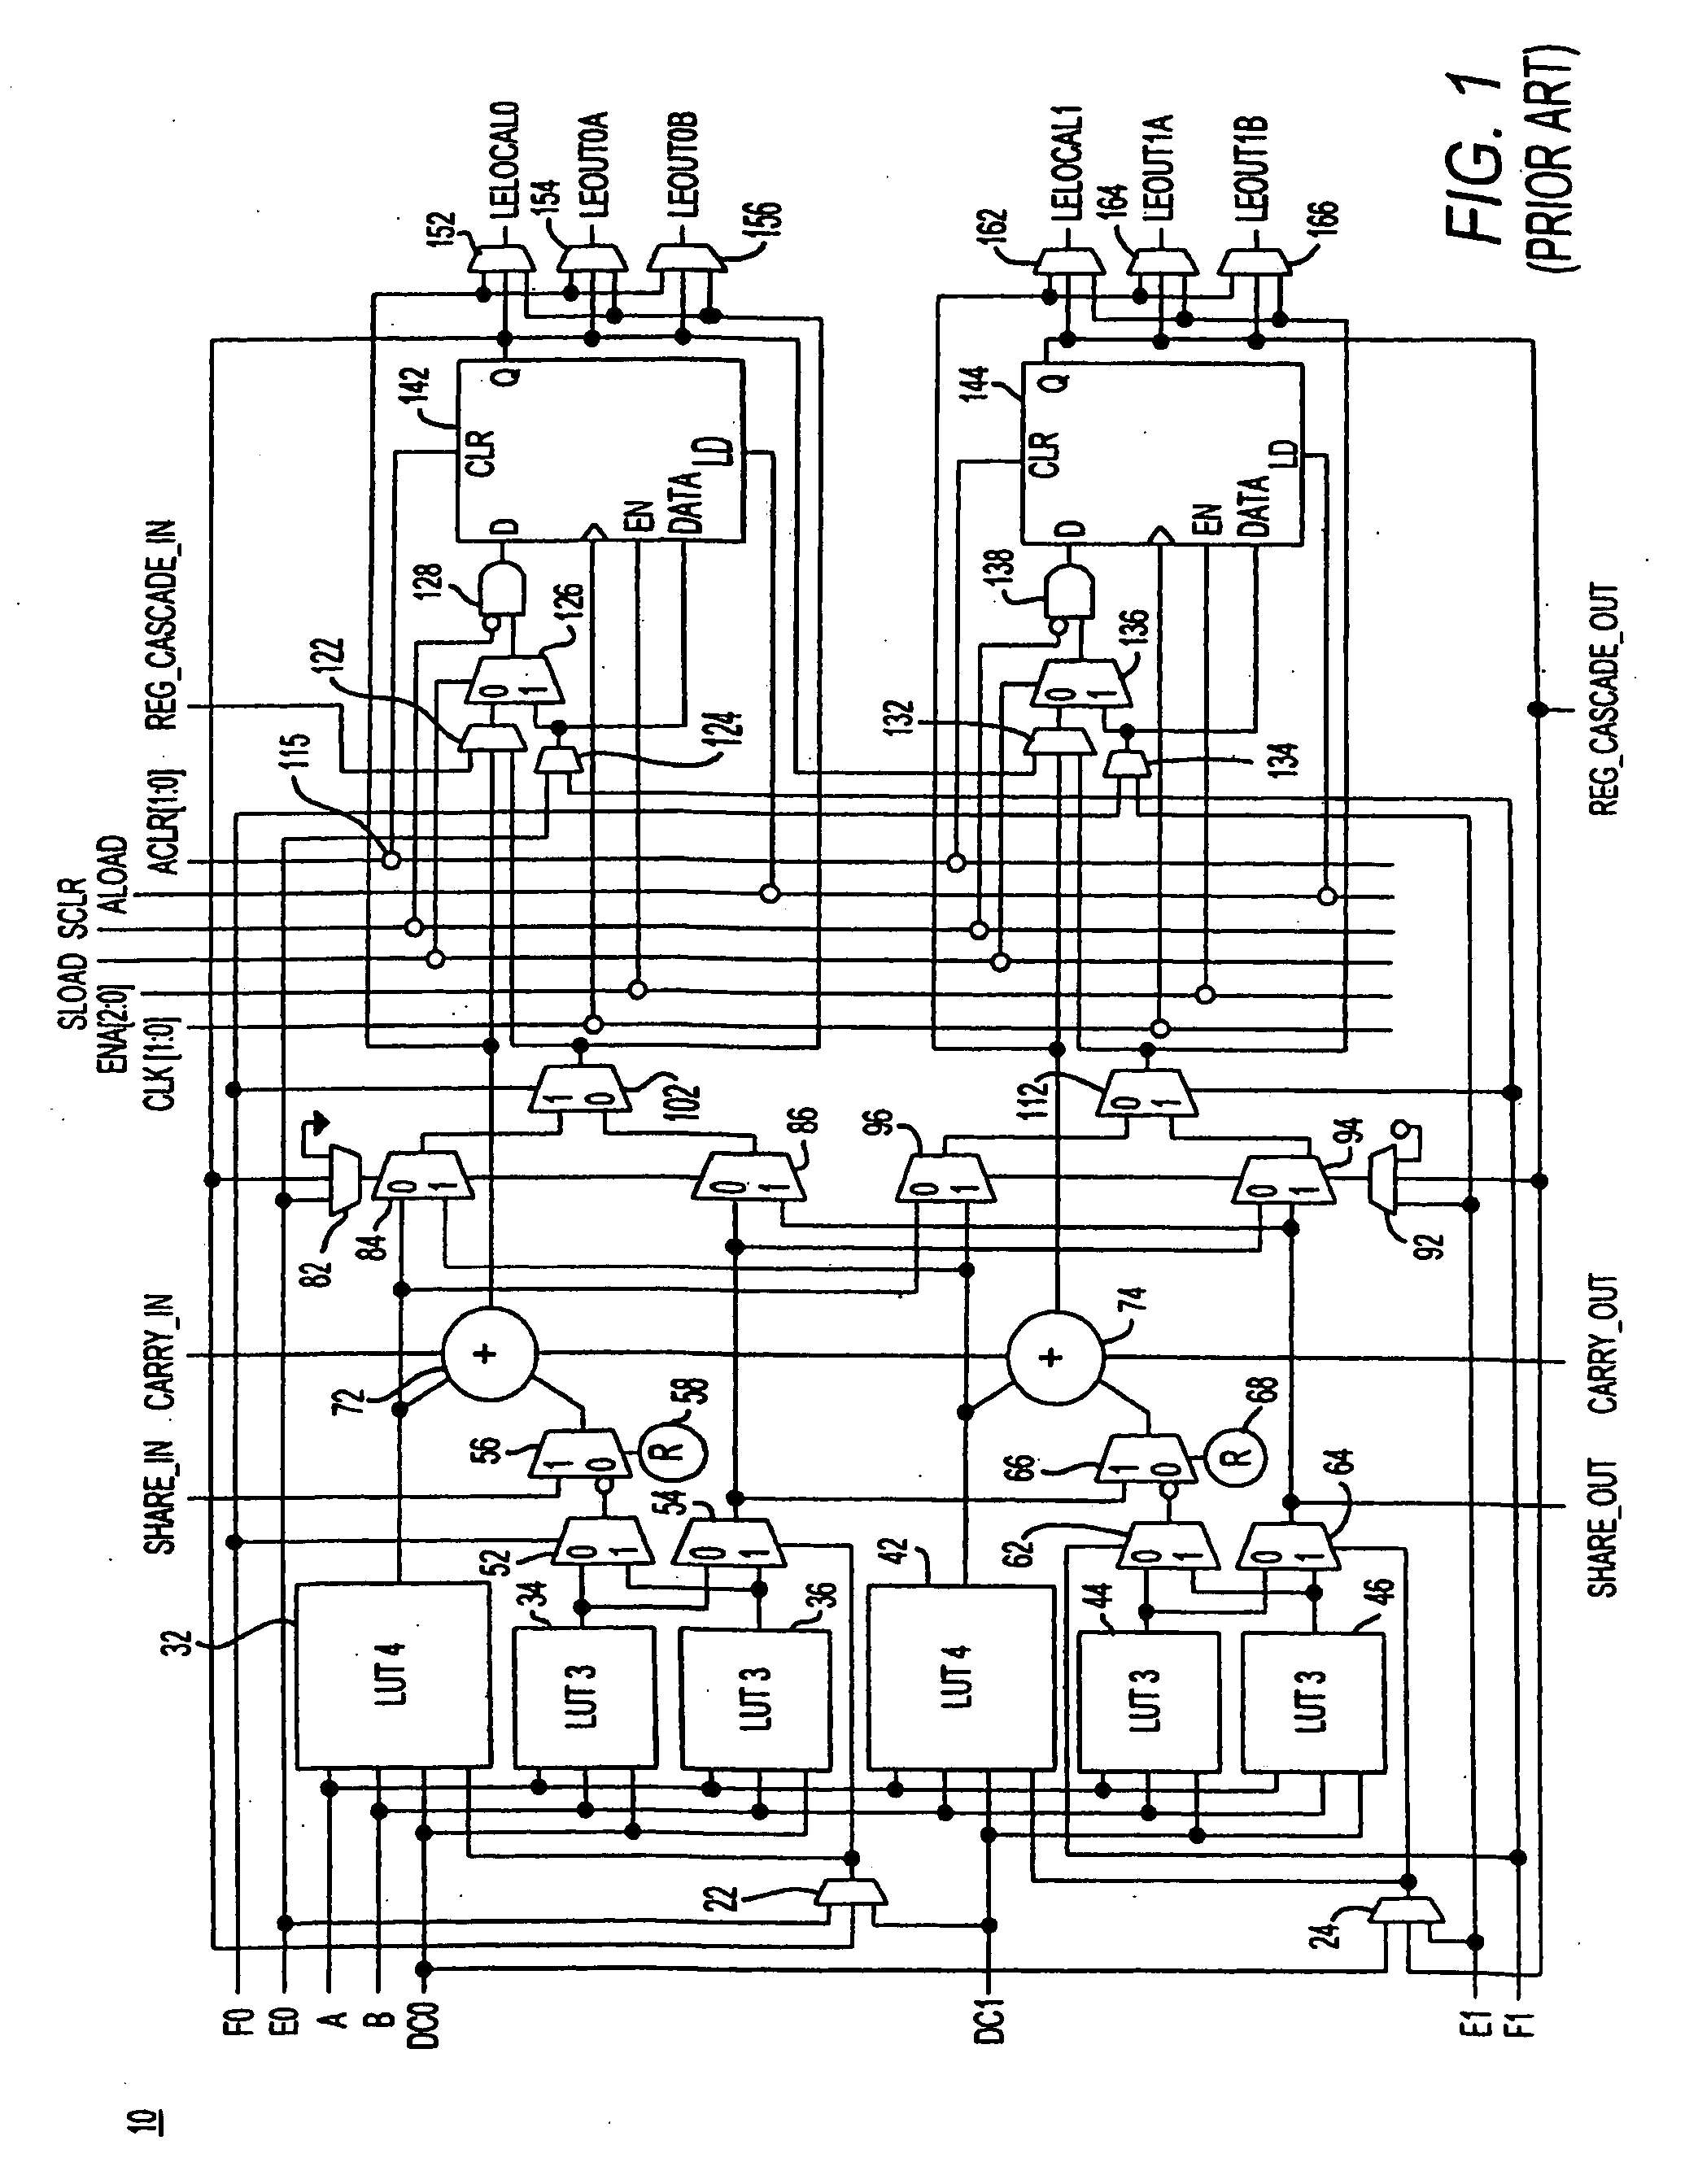 Method and apparatus for programmably powering down structured application-specific integrated circuits